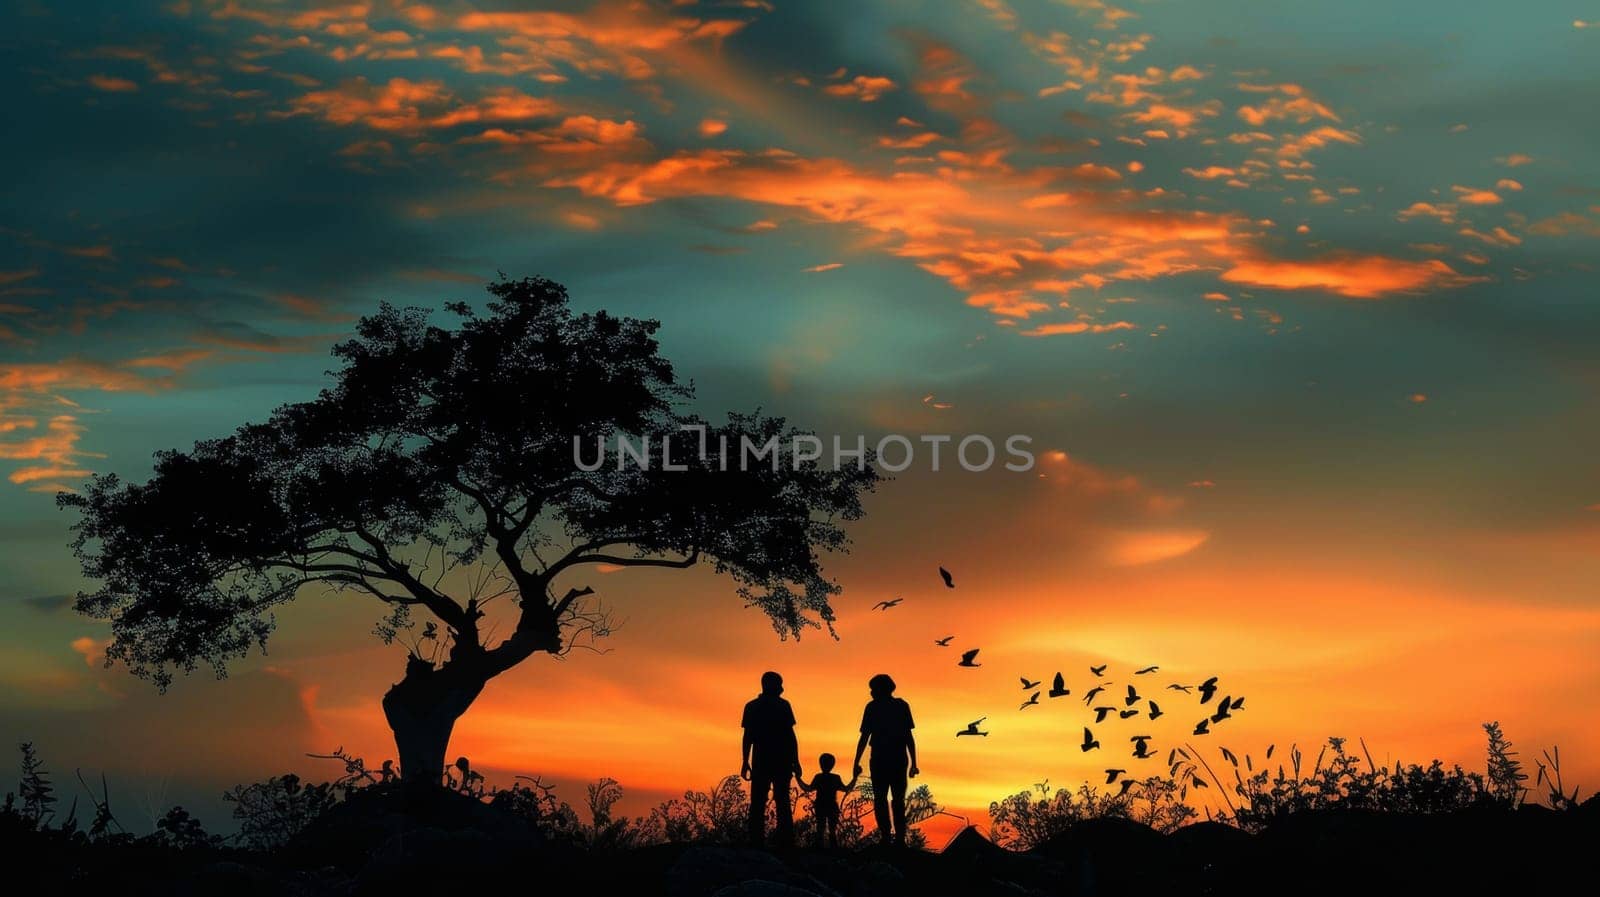 A family of people standing under a tree at sunset